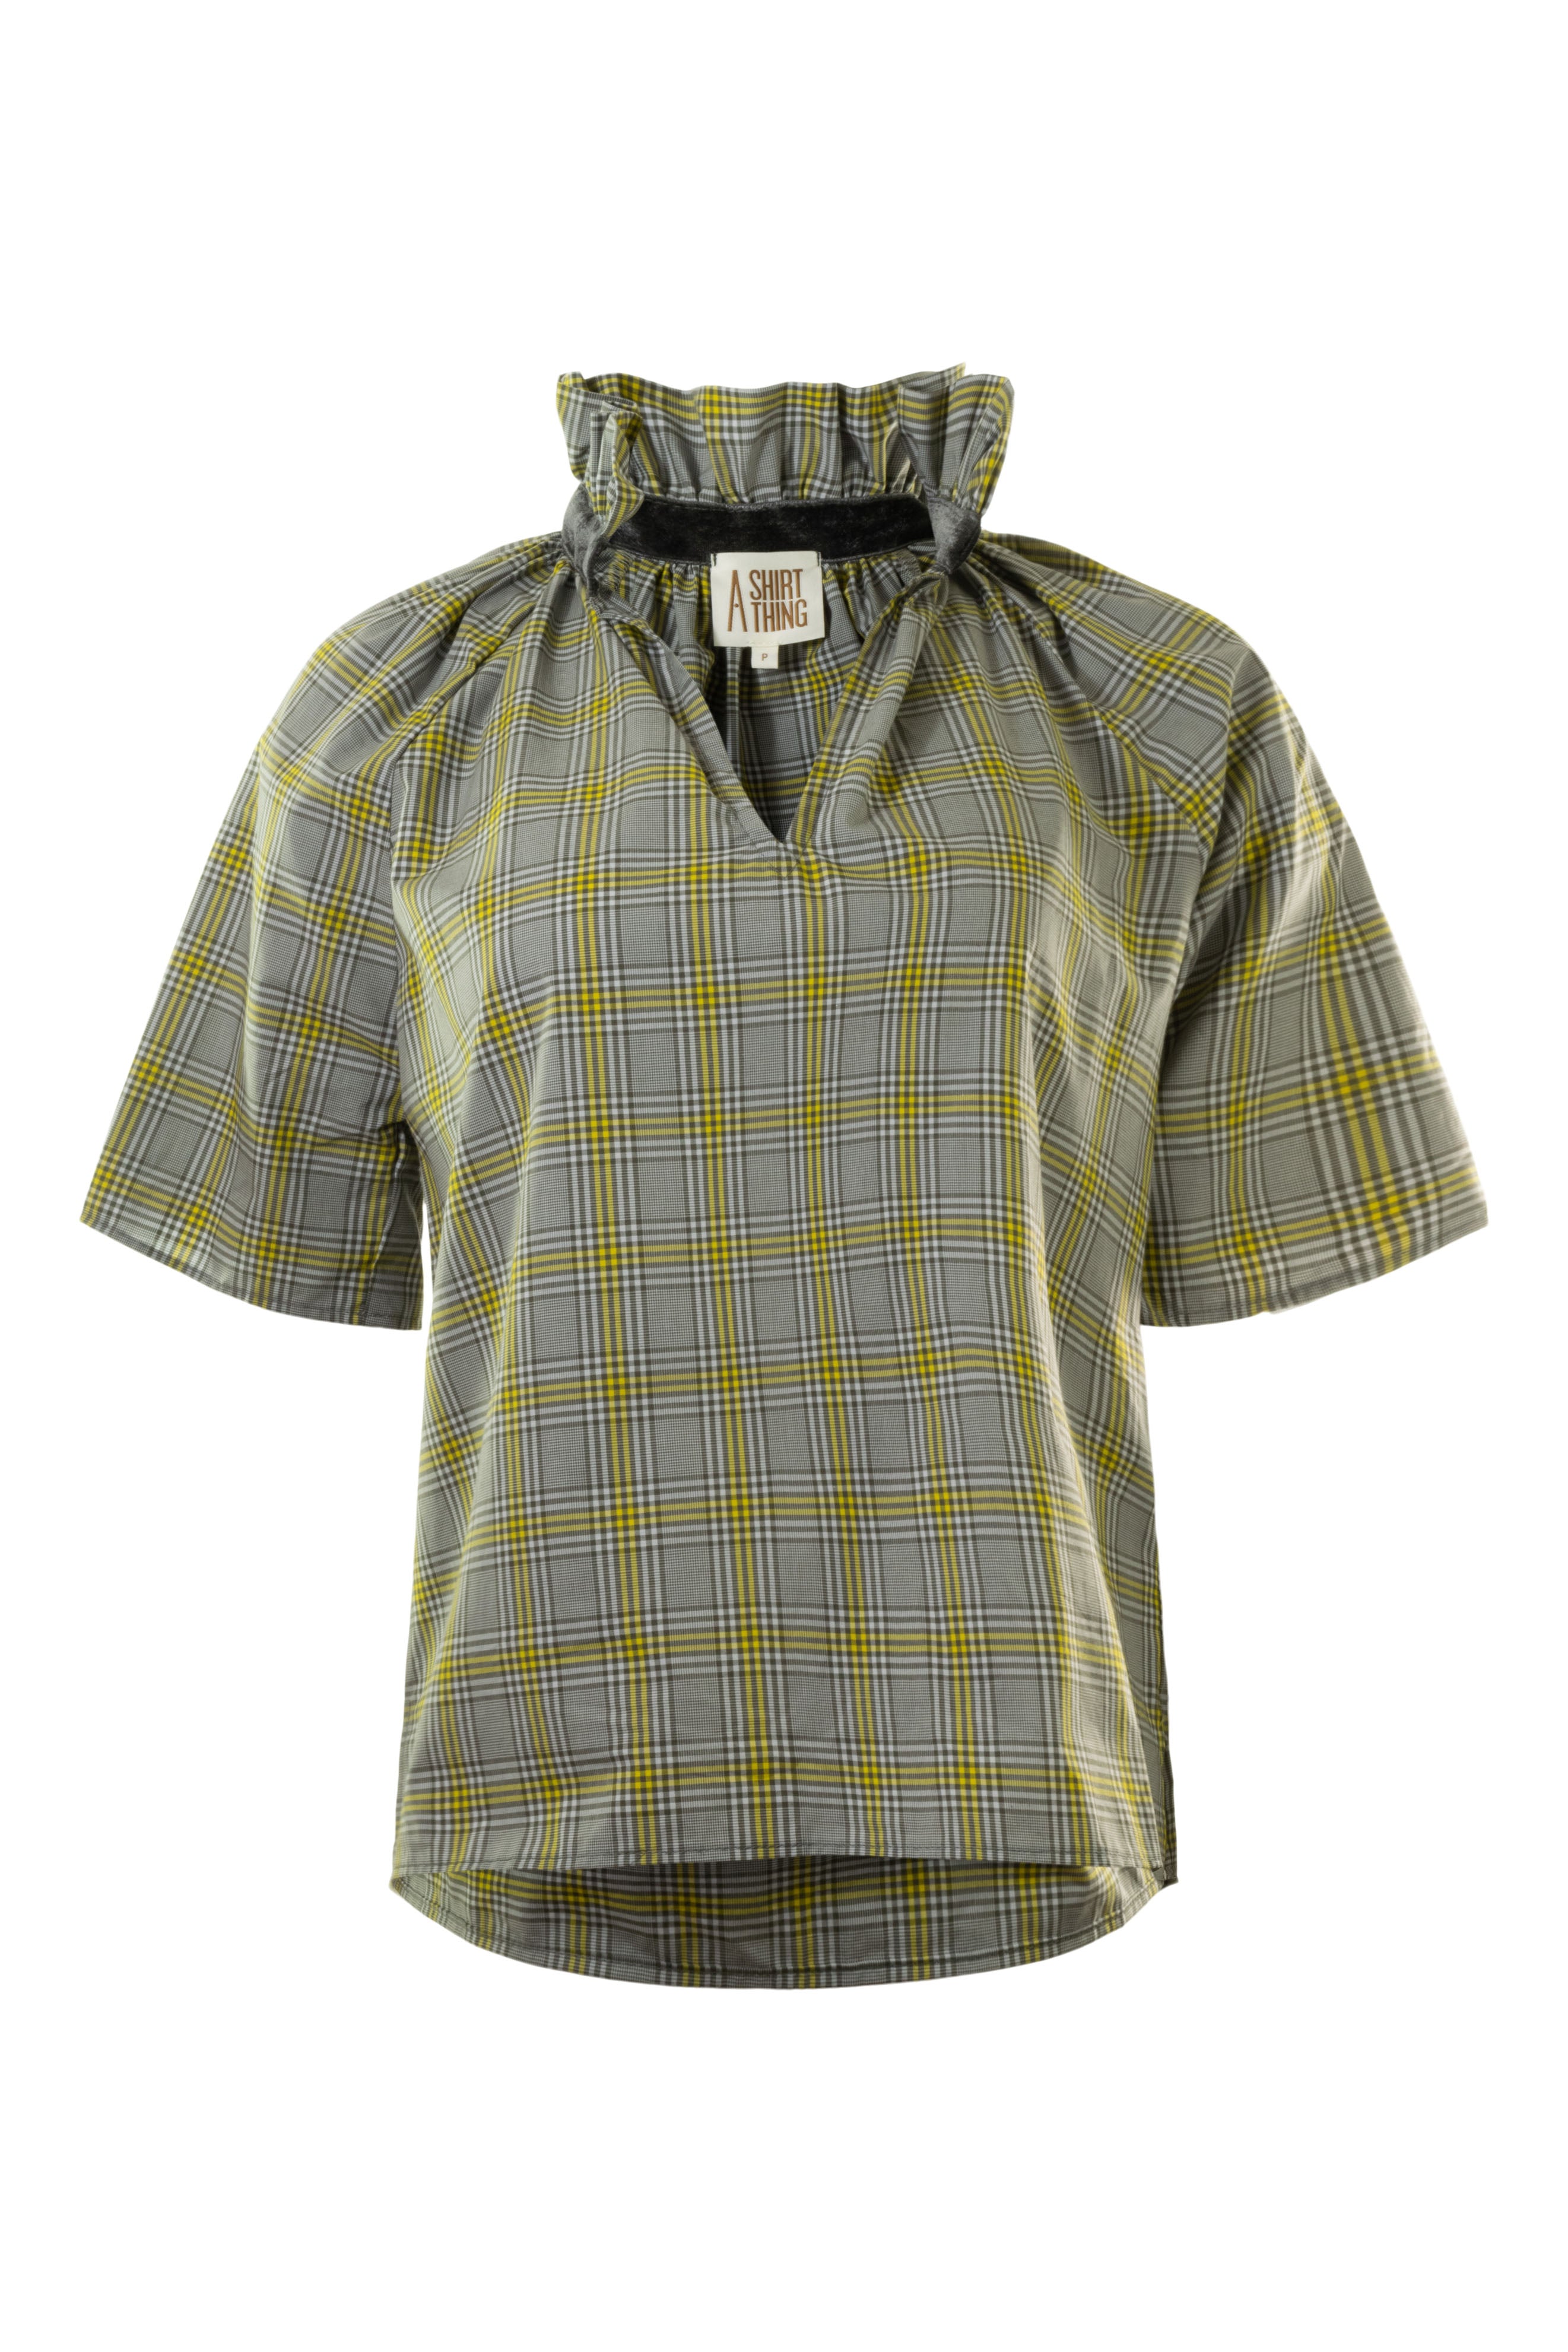 A Shirt Thing Margot Plaid in Charcoal